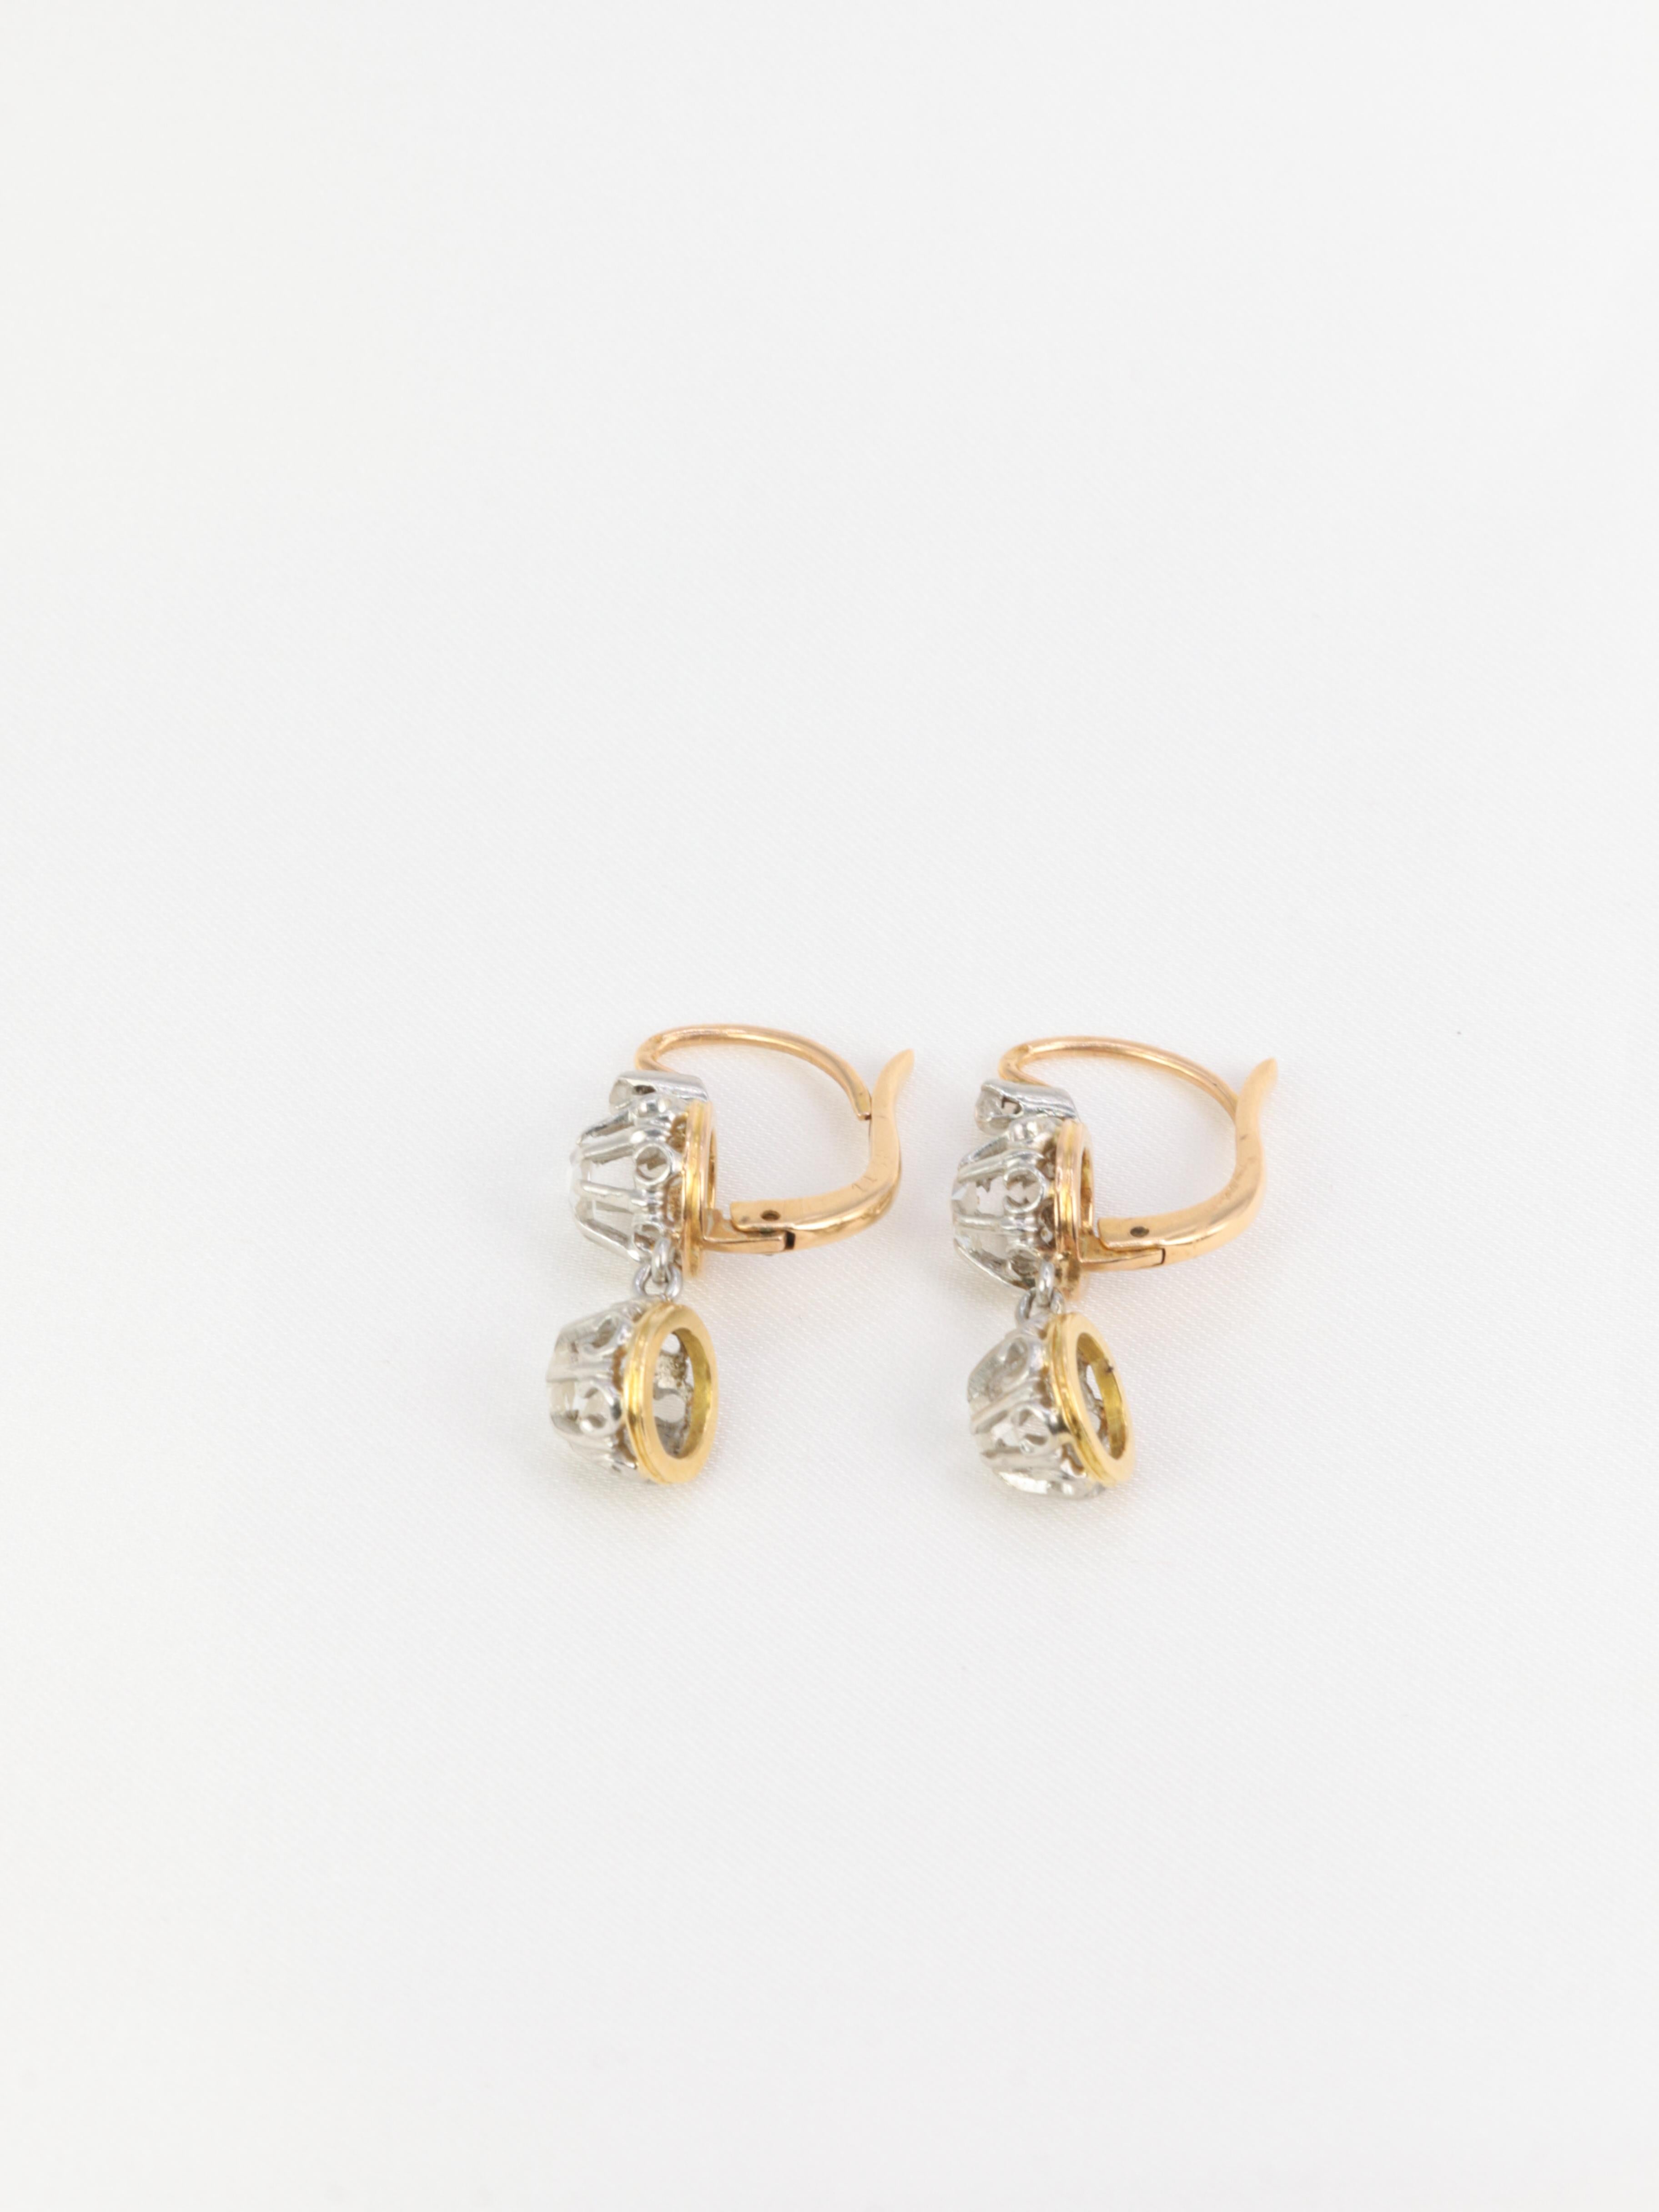 Rose Cut Antique dormeuse earrings in yellow gold and rose-cut diamonds For Sale